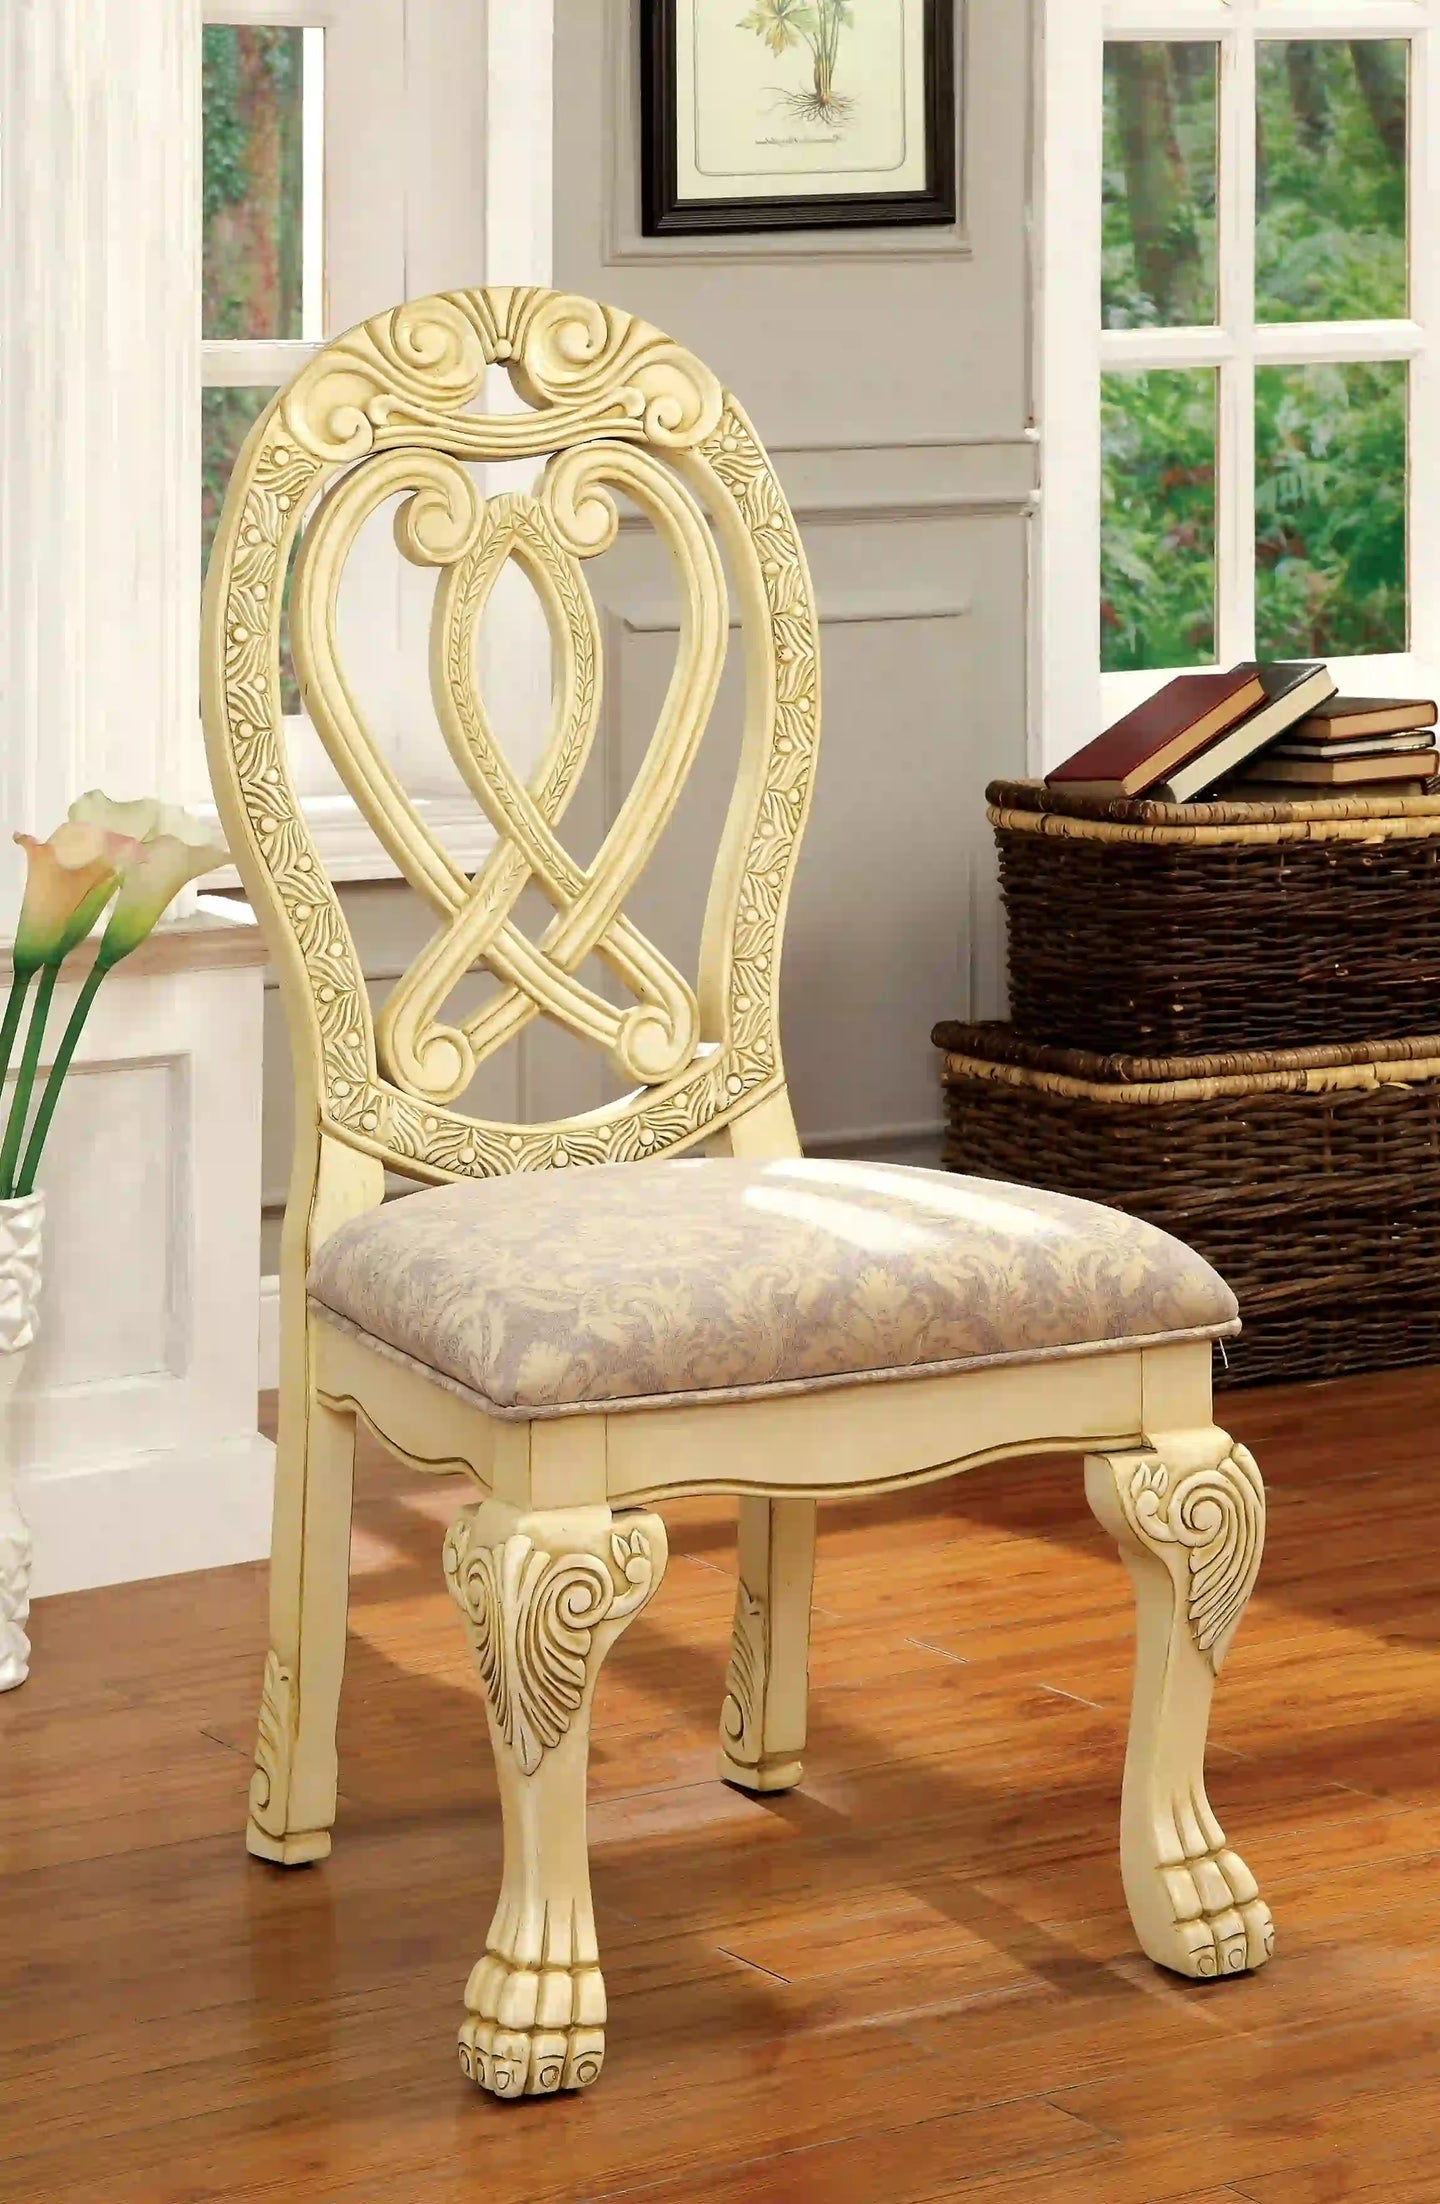 Furniture of America Beau Traditional Padded Side Chairs in White (Set of 2) - IDF-3186WH-SC